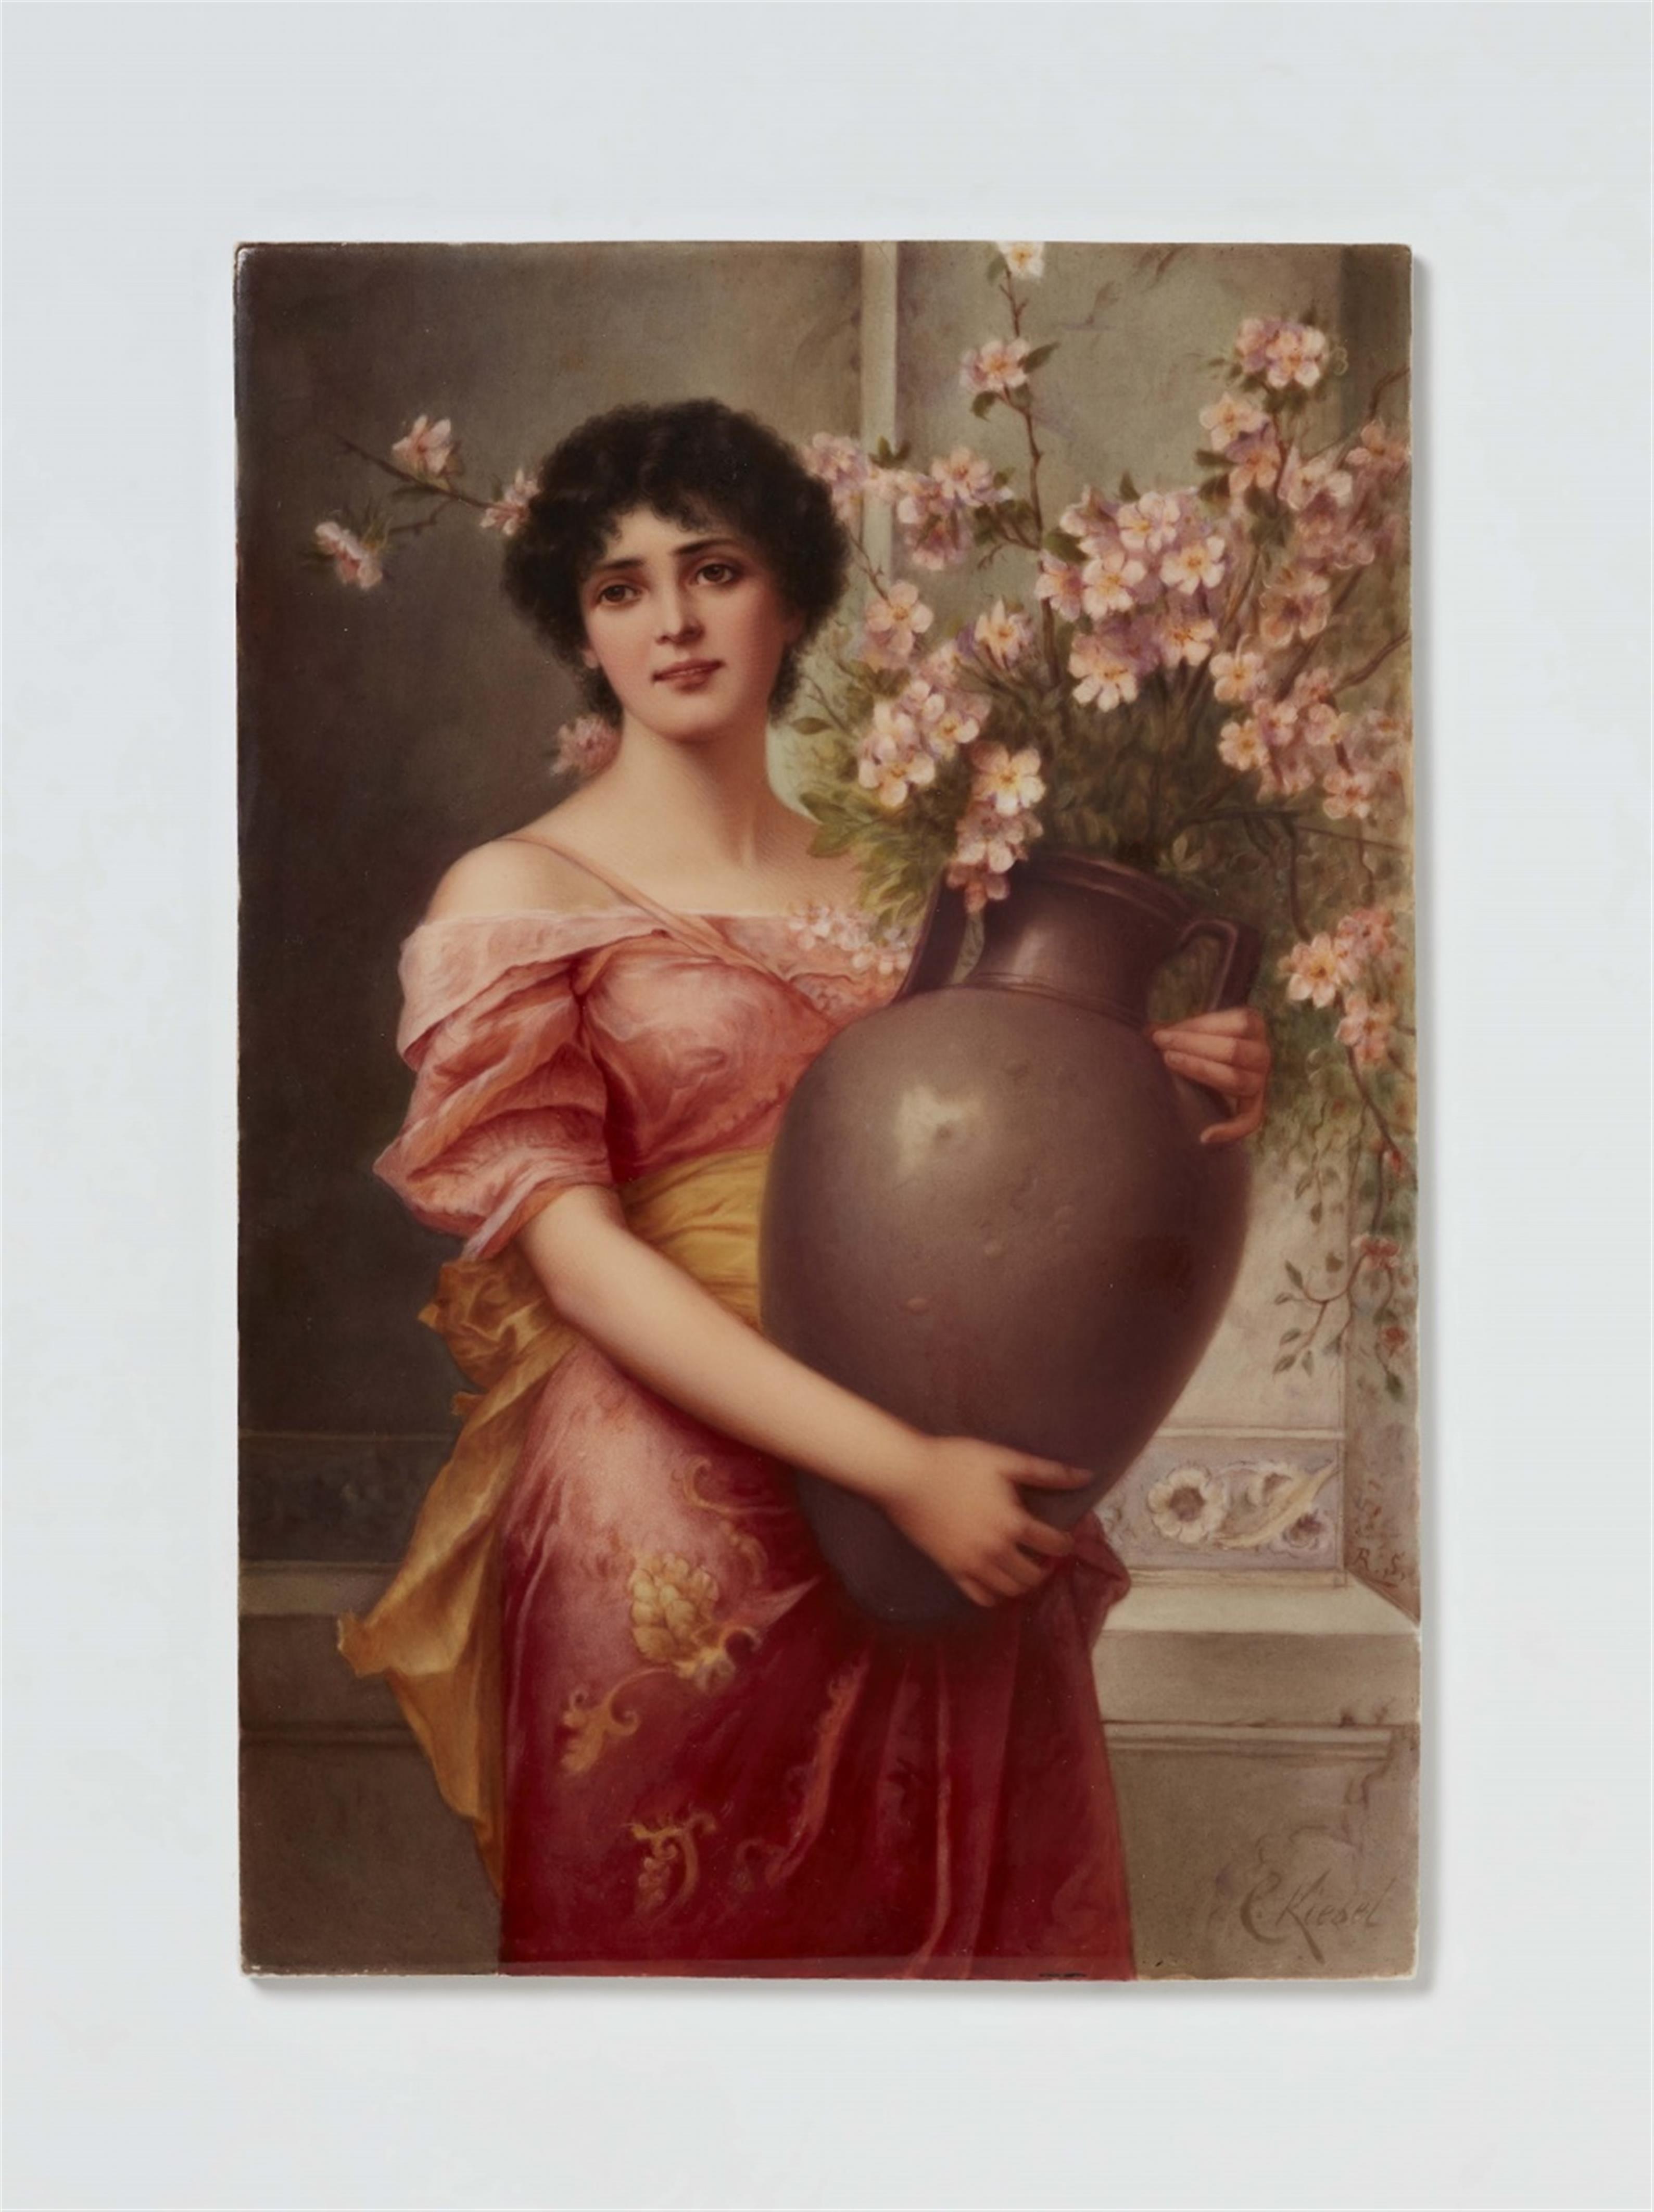 A Berlin KPM porcelain plaque with a reproduction of Conrad Kiesel's “Apfelblüte“ - 